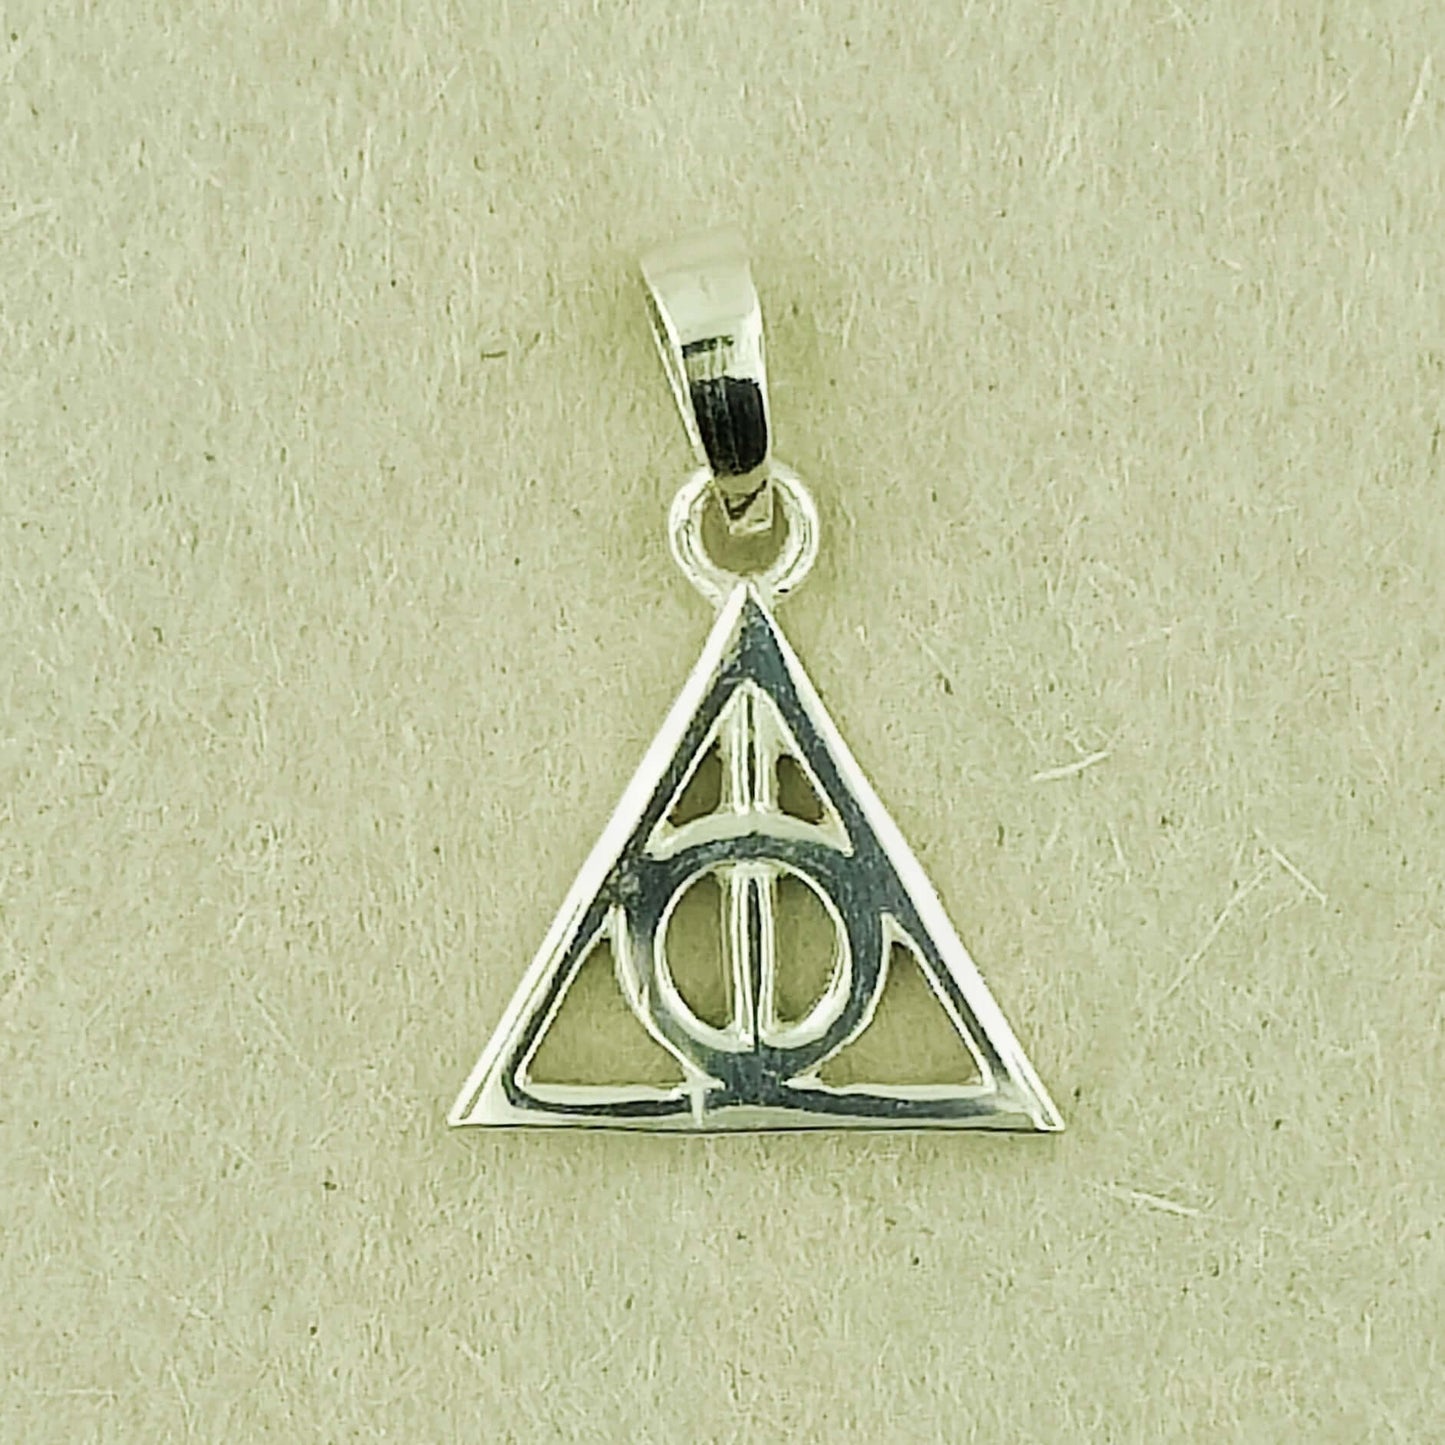 Deathly Wizard Charm Pendant in Sterling Silver or Bronze, Precious Metal Cosplay Jewelry, Precious Metal Cosplay Jewelery, Precious Metal Cosplay Jewellery, Precious Metal Geekery, Silver Wizard Charm, Deathly Hallows Pendant, Silver Geek Jewellery, Bronze Geek Jewellery, Geeky Gift For Her, Geeky Christmas Gift, Bronze Geek Pendant, Silver Geek Pendant